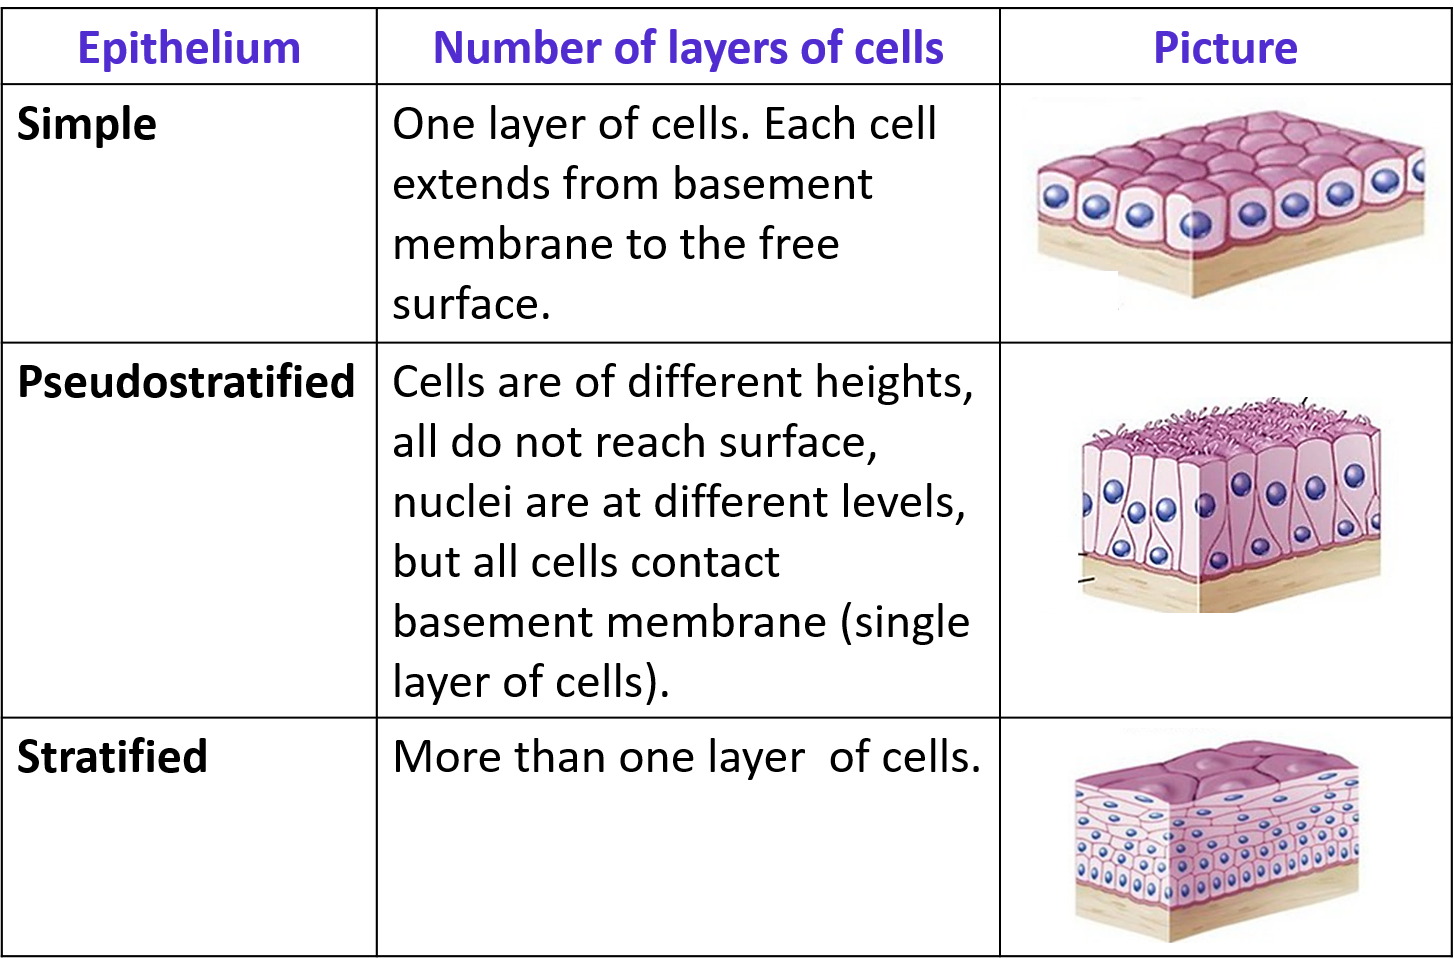 classification of epithelium based of number of layers